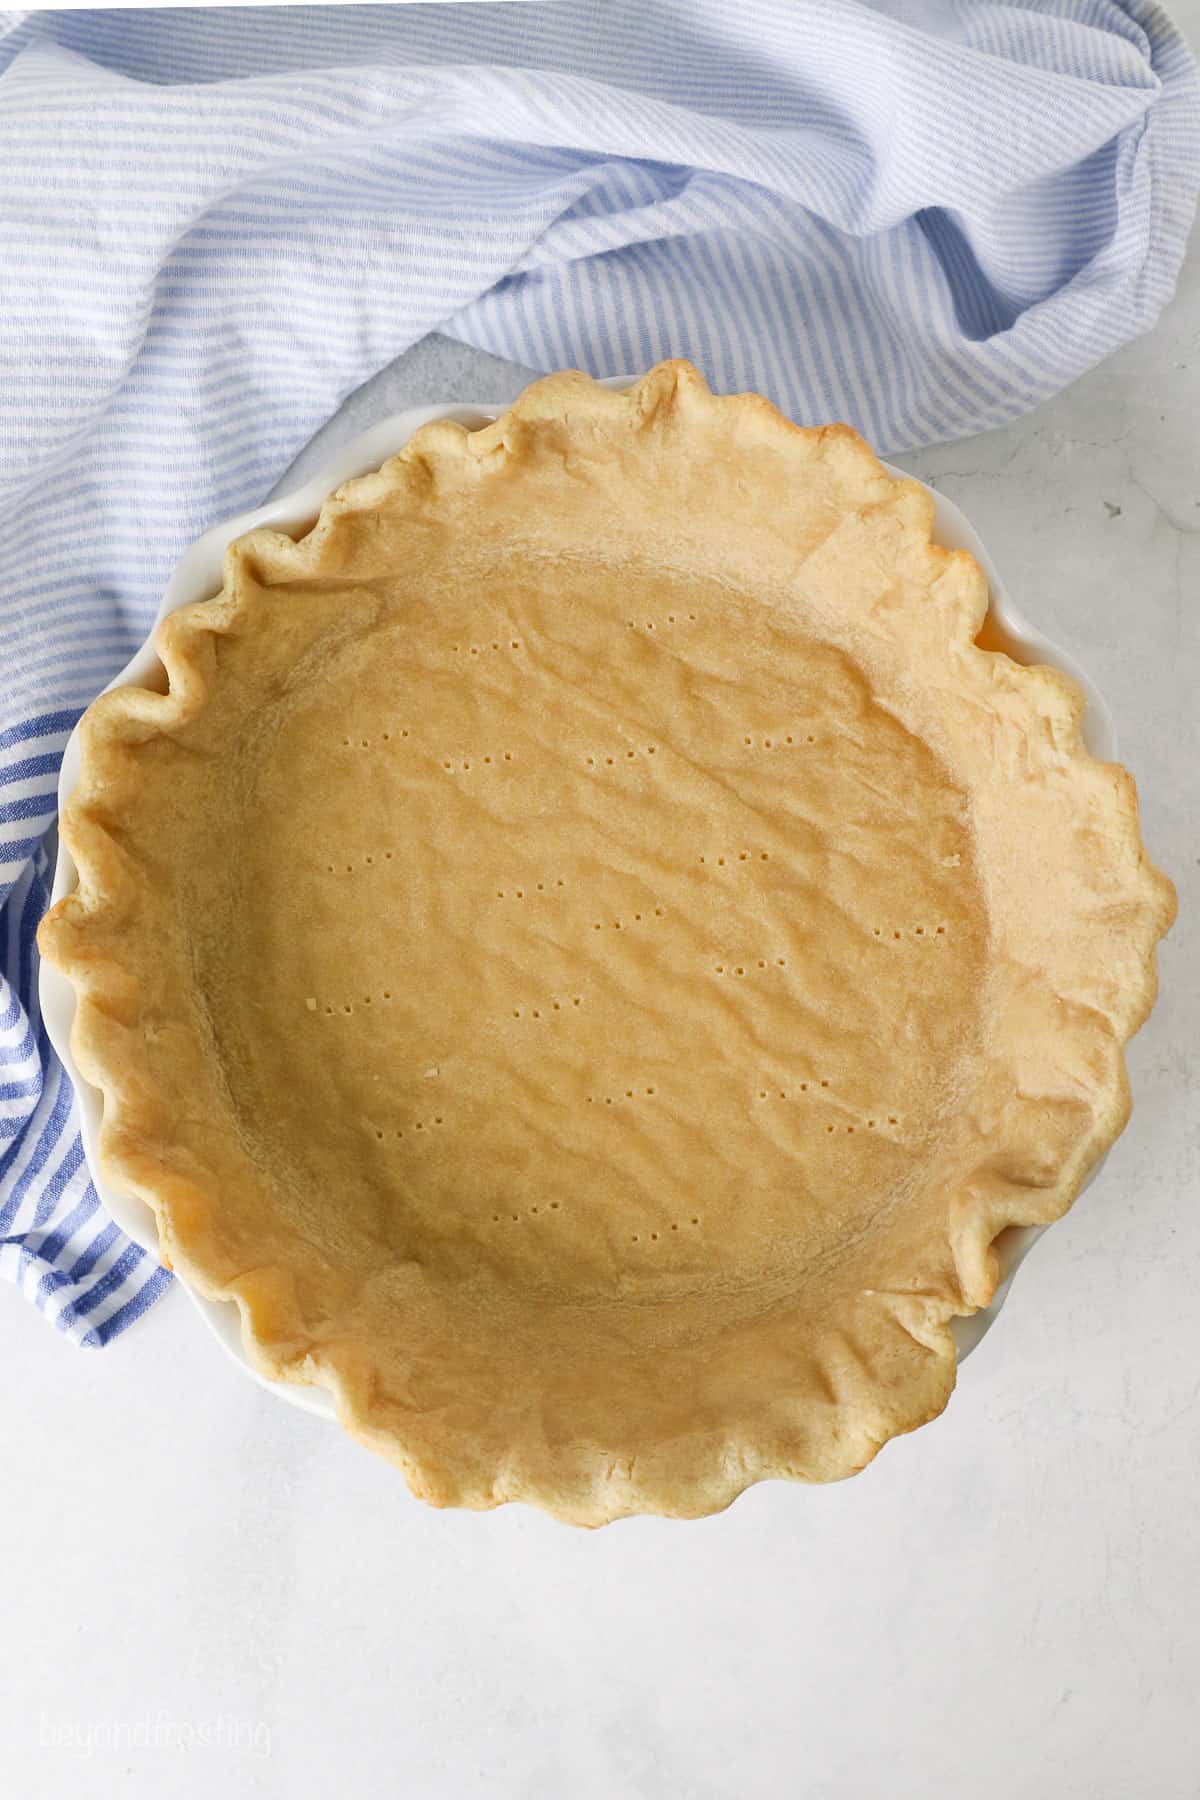 Overhead view of a partially baked pie crust in a pie plate after removing the pie weights.